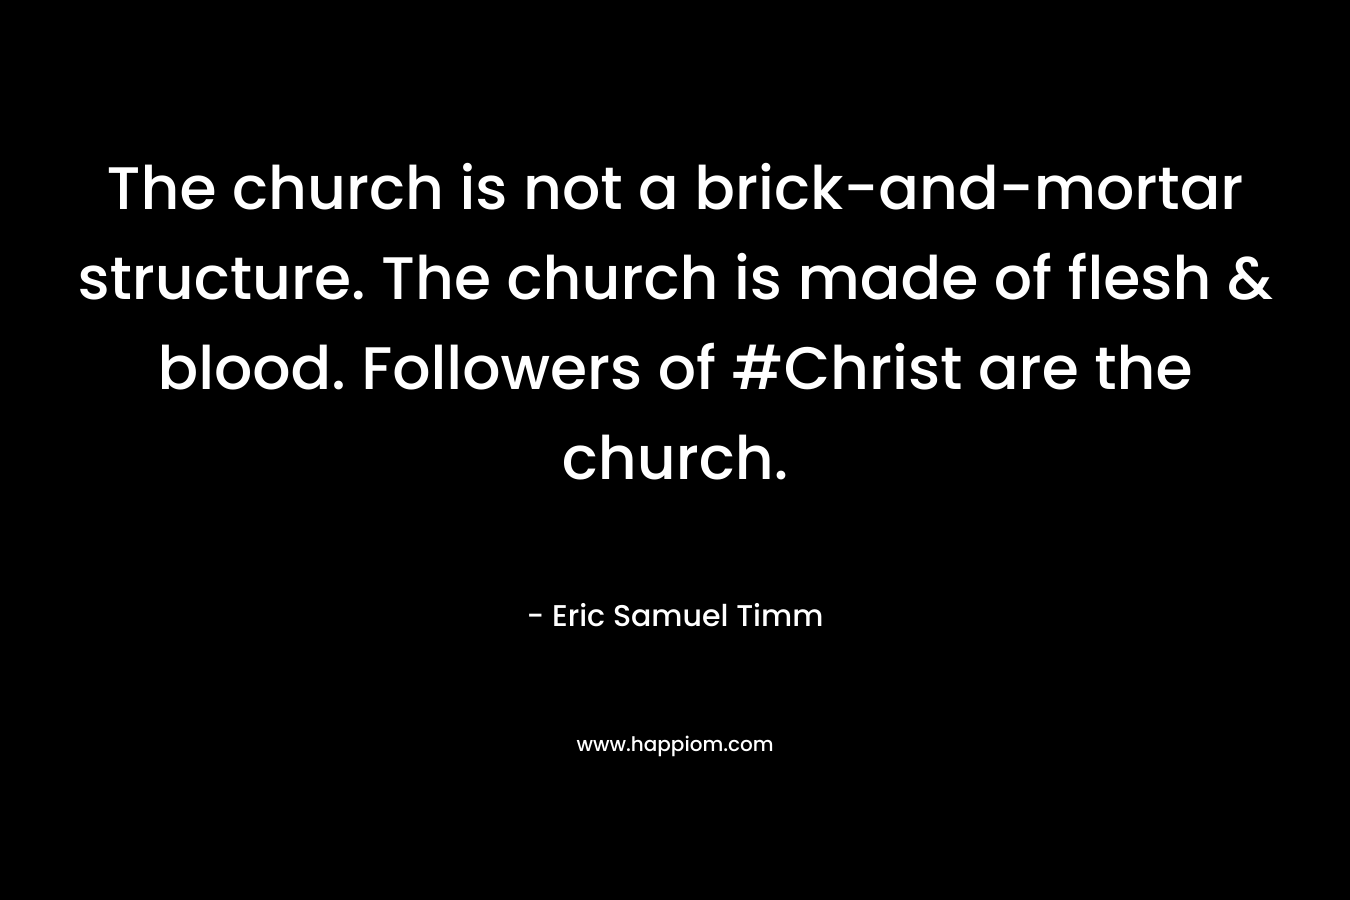 The church is not a brick-and-mortar structure. The church is made of flesh & blood. Followers of #Christ are the church.